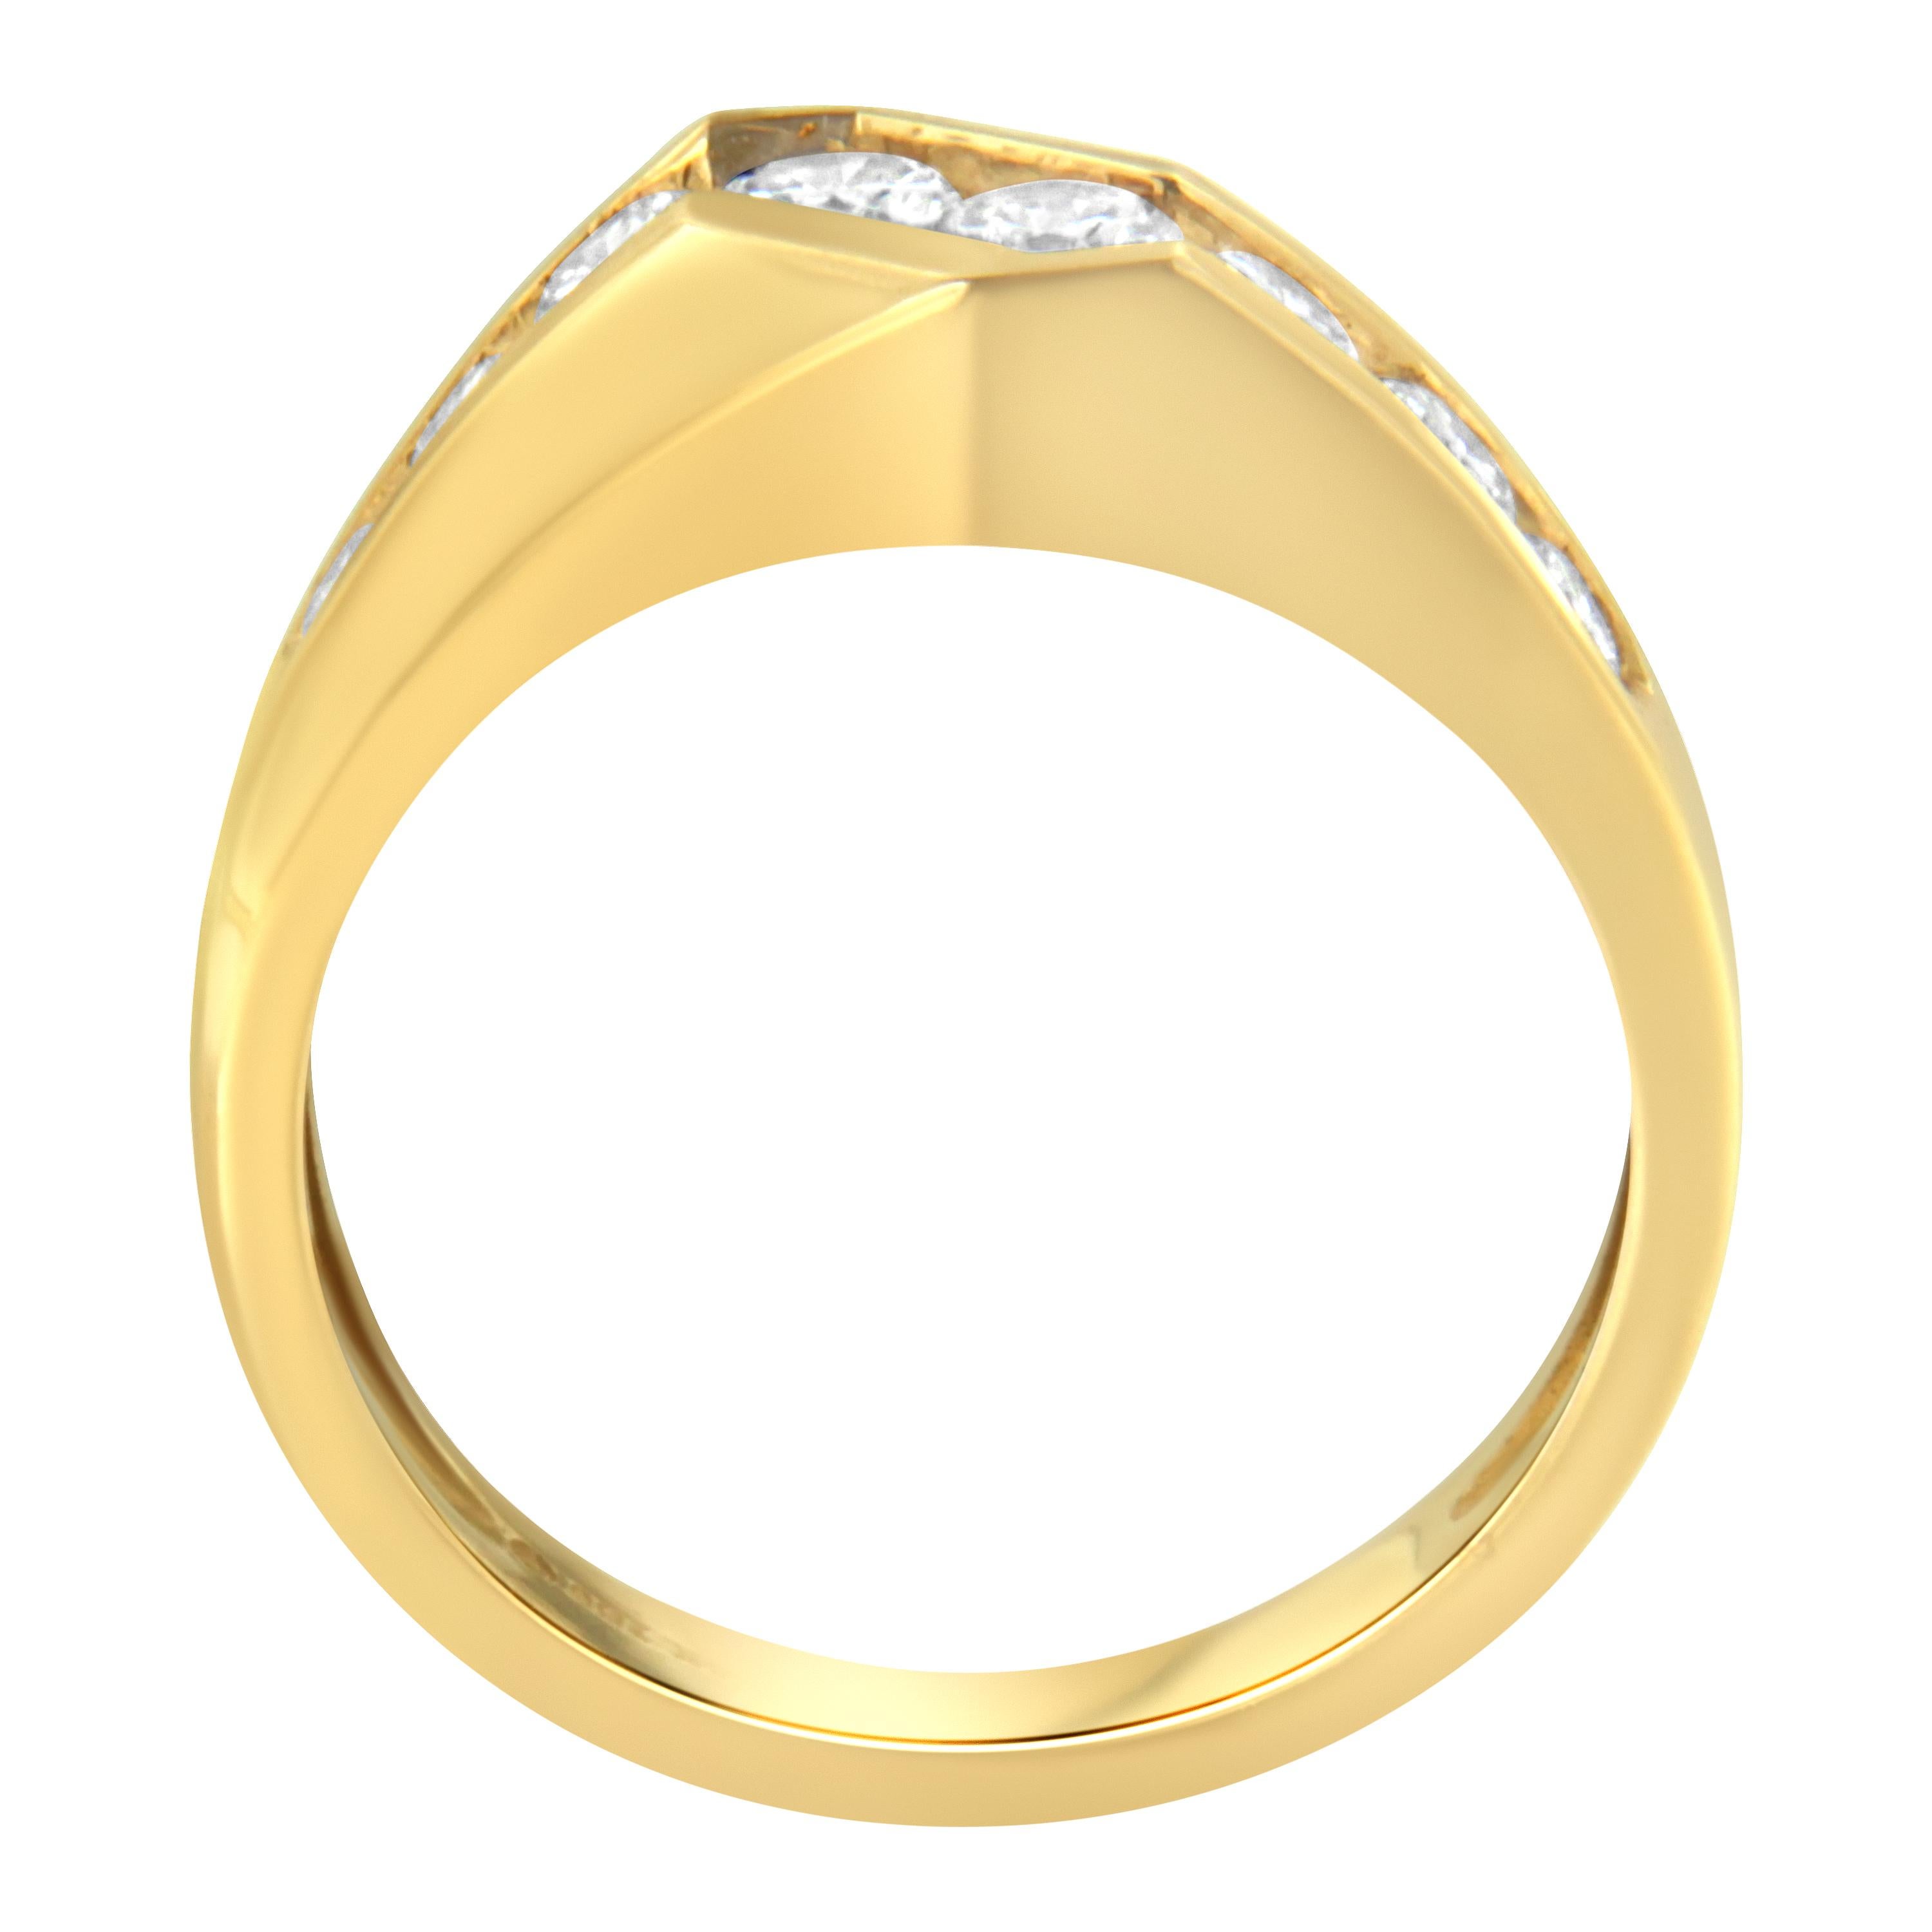 Contemporary 14K Yellow Gold Men's 1.00 Carat Round Cut Diamond Ring For Sale